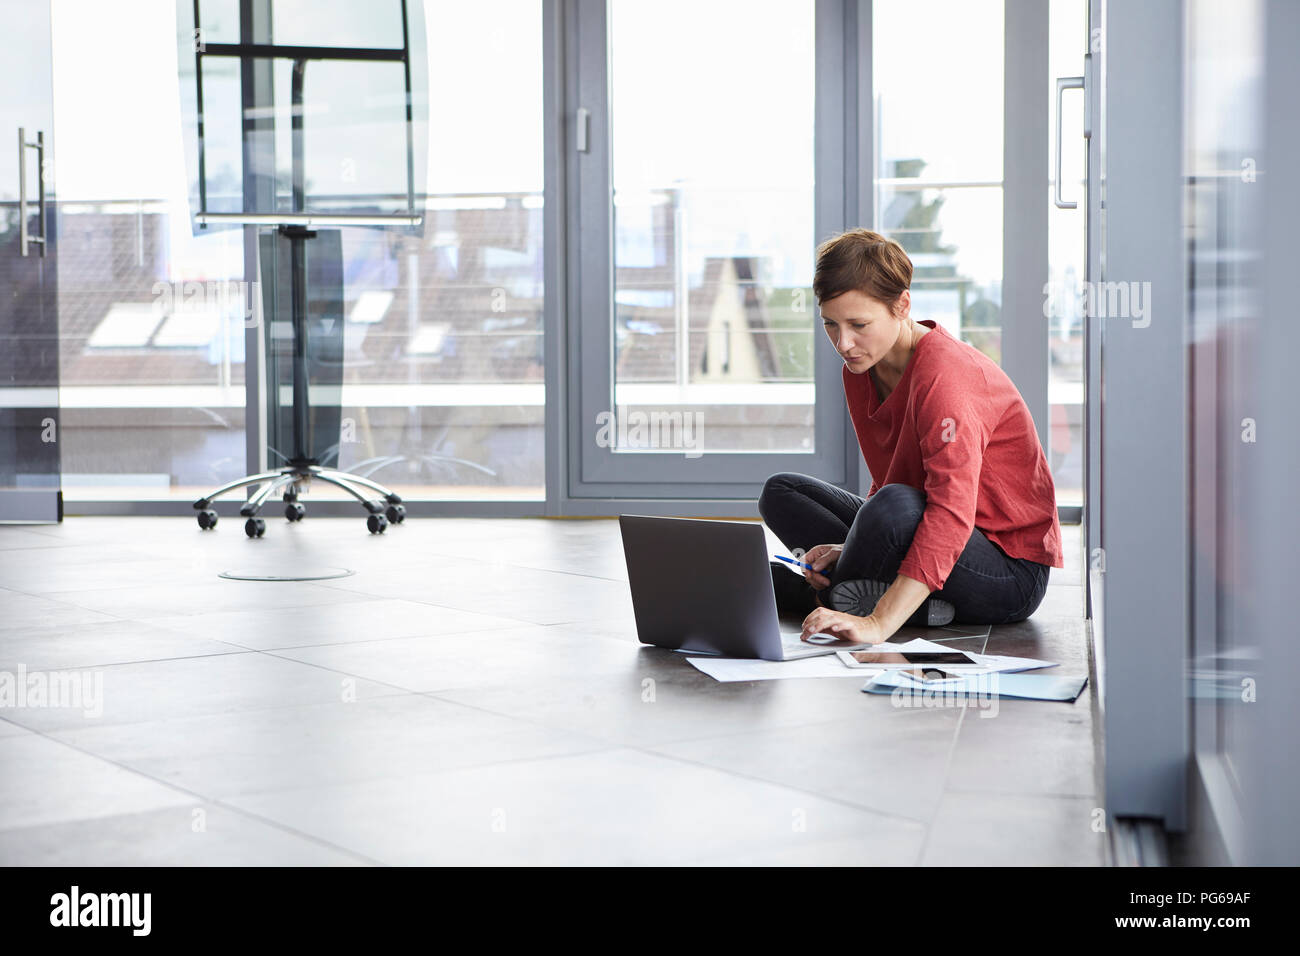 Businesswoman sitting on the floor in office using laptop Stock Photo